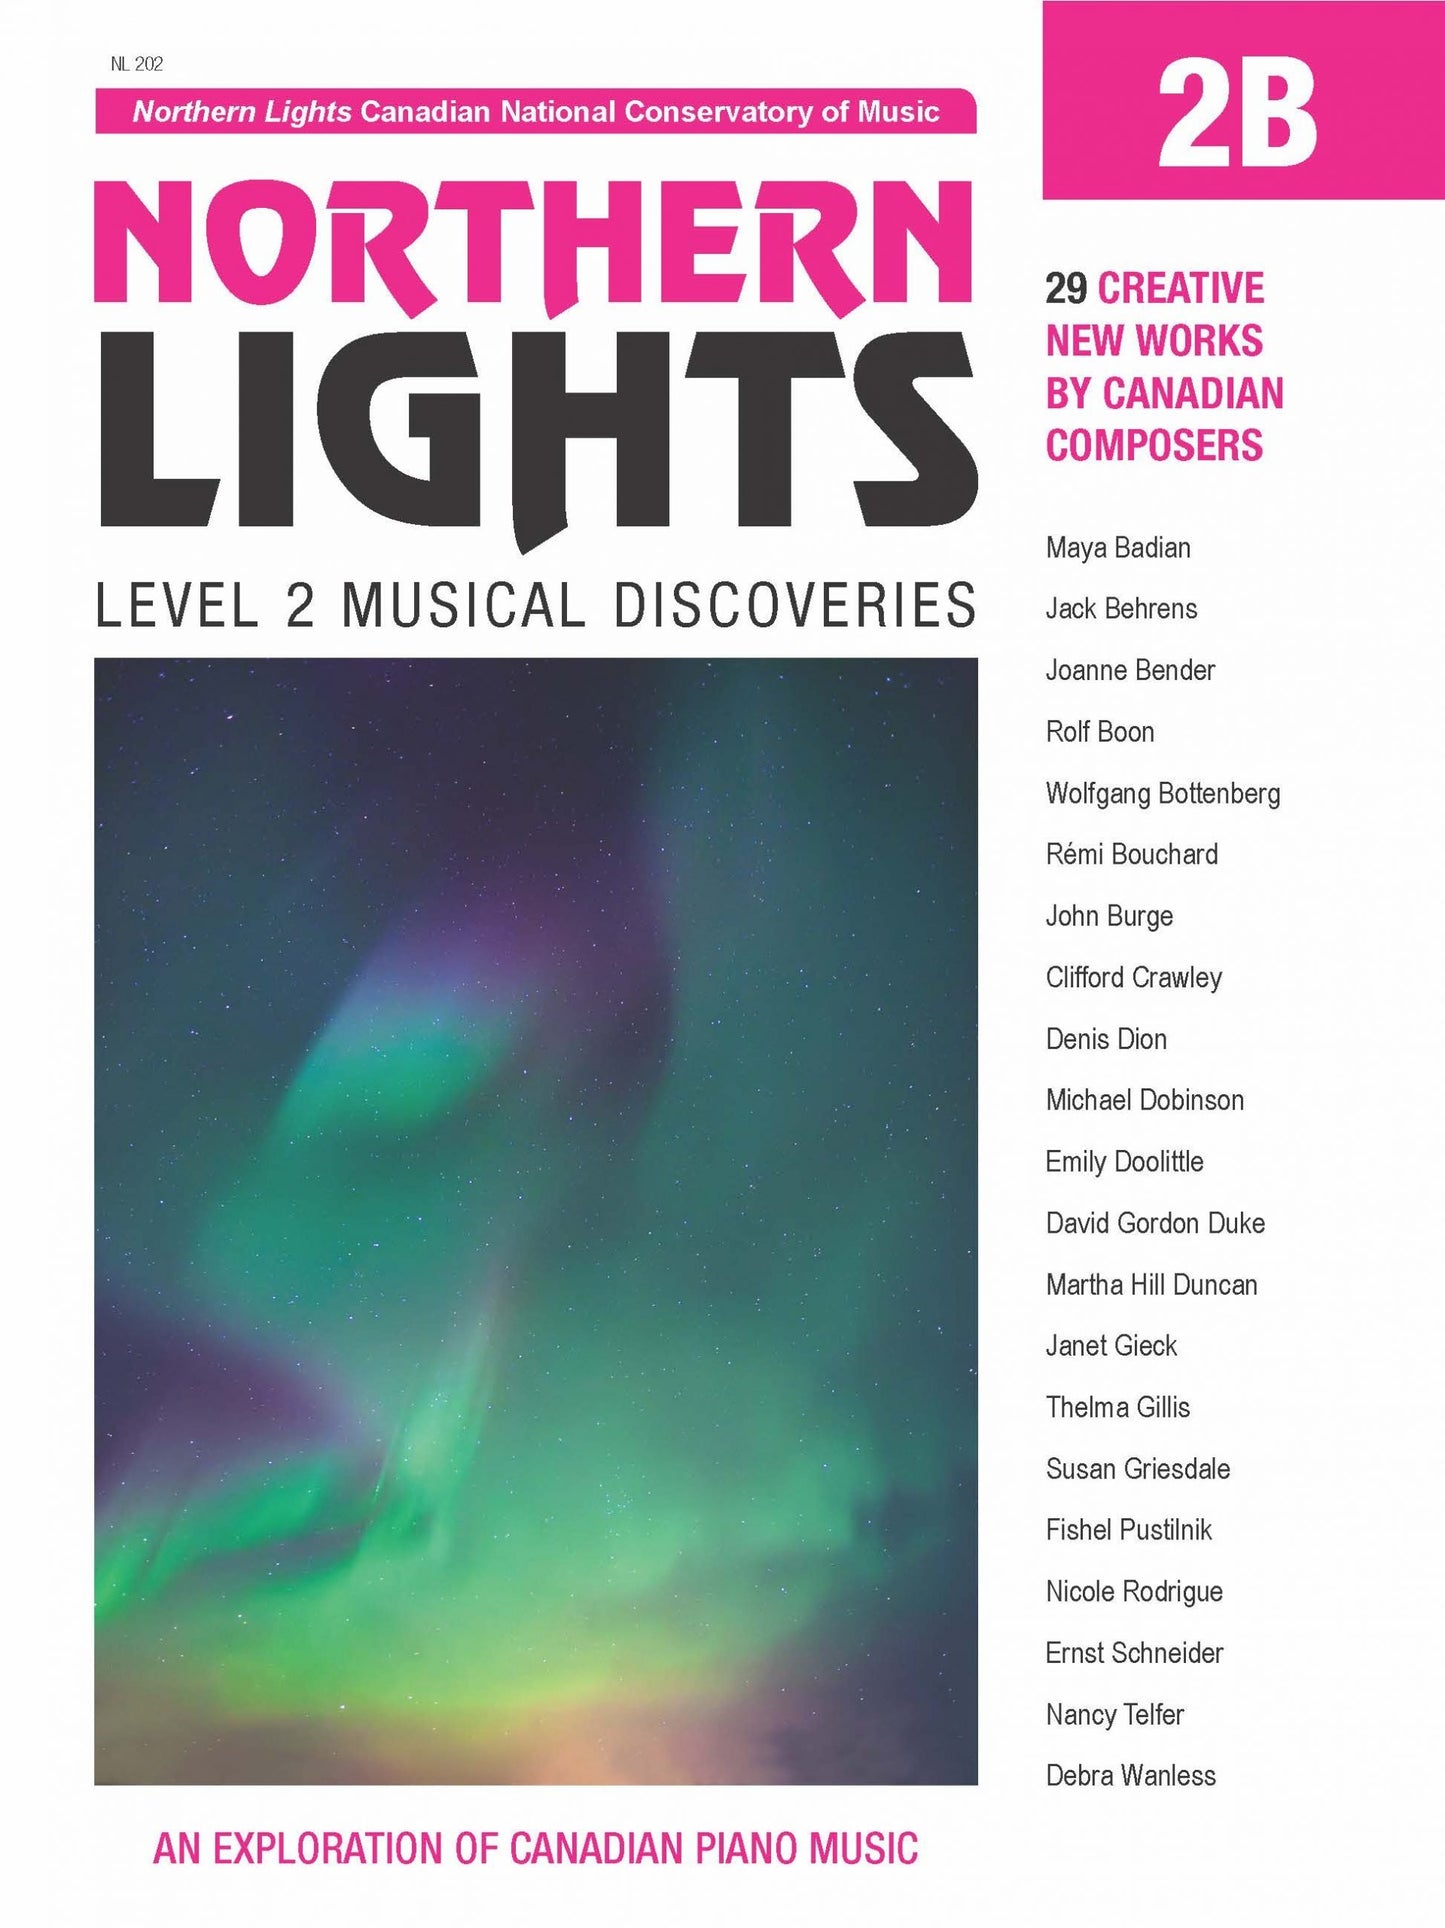 Northern Lights 2B – Musical Discoveries